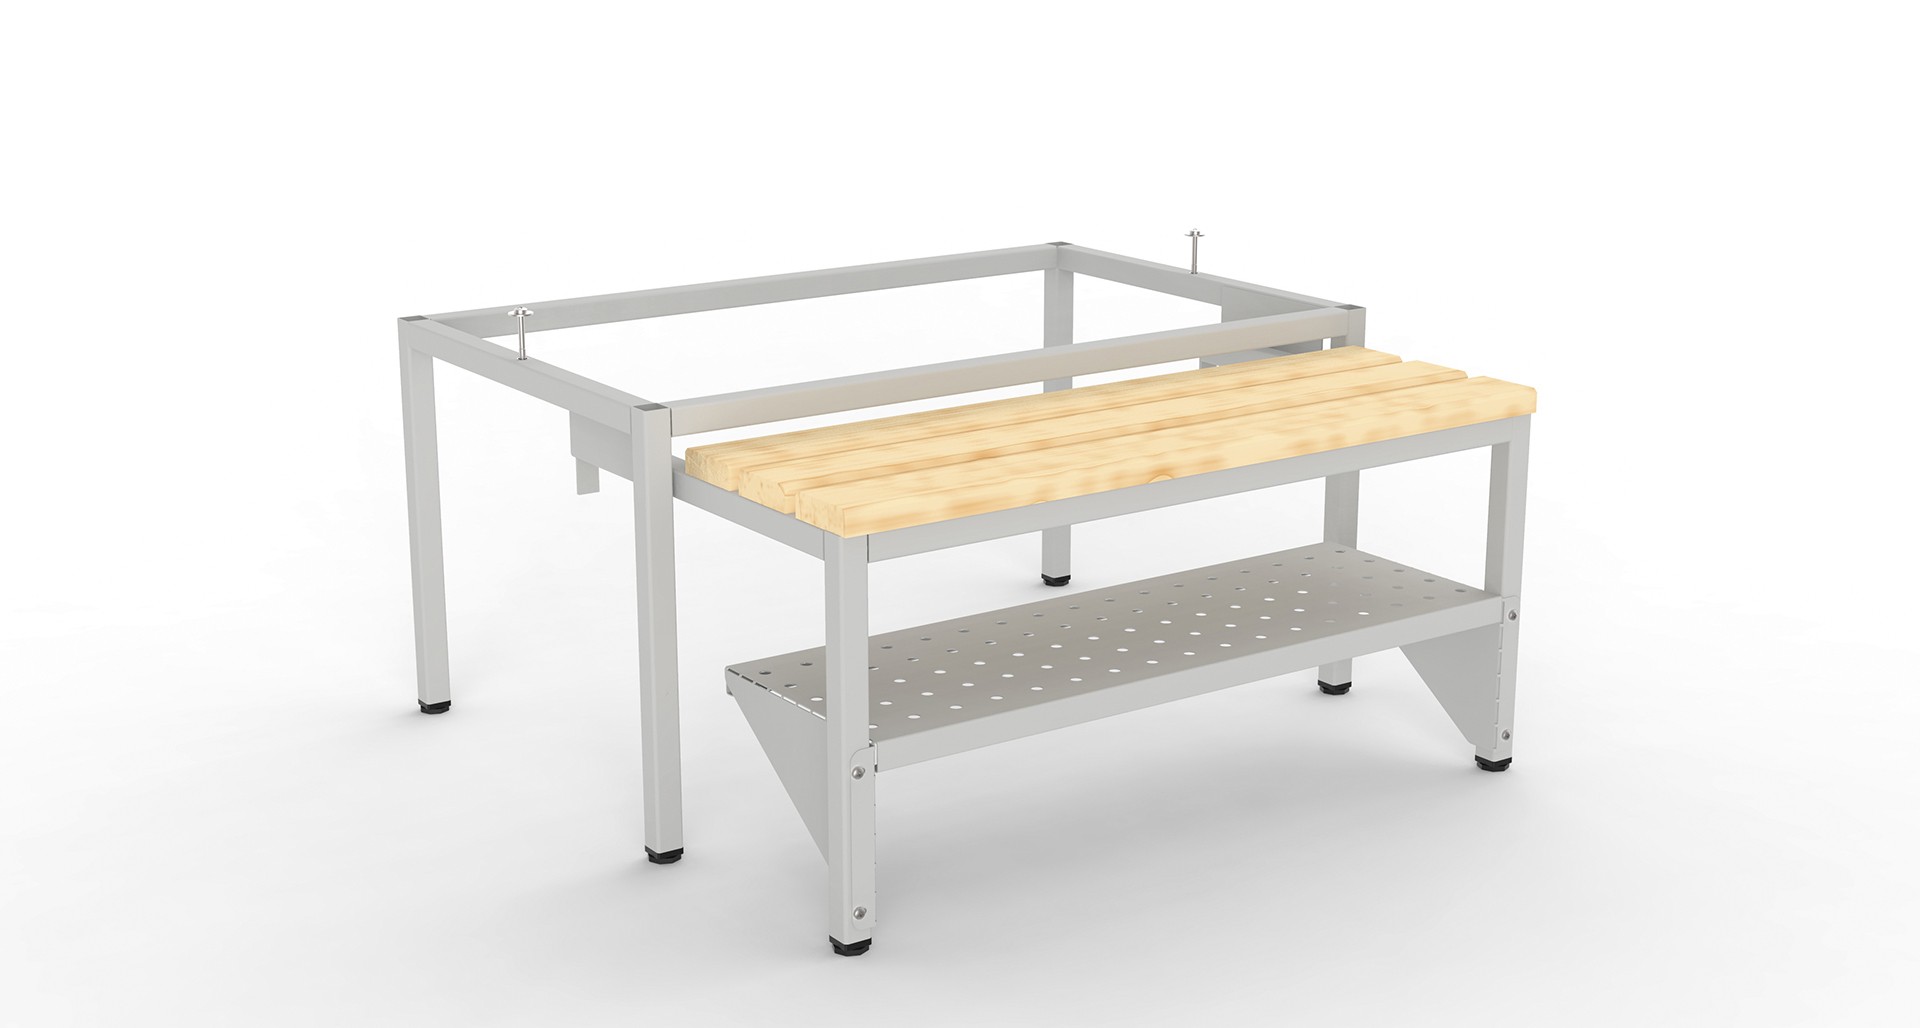 Retractable bench with shoe rack